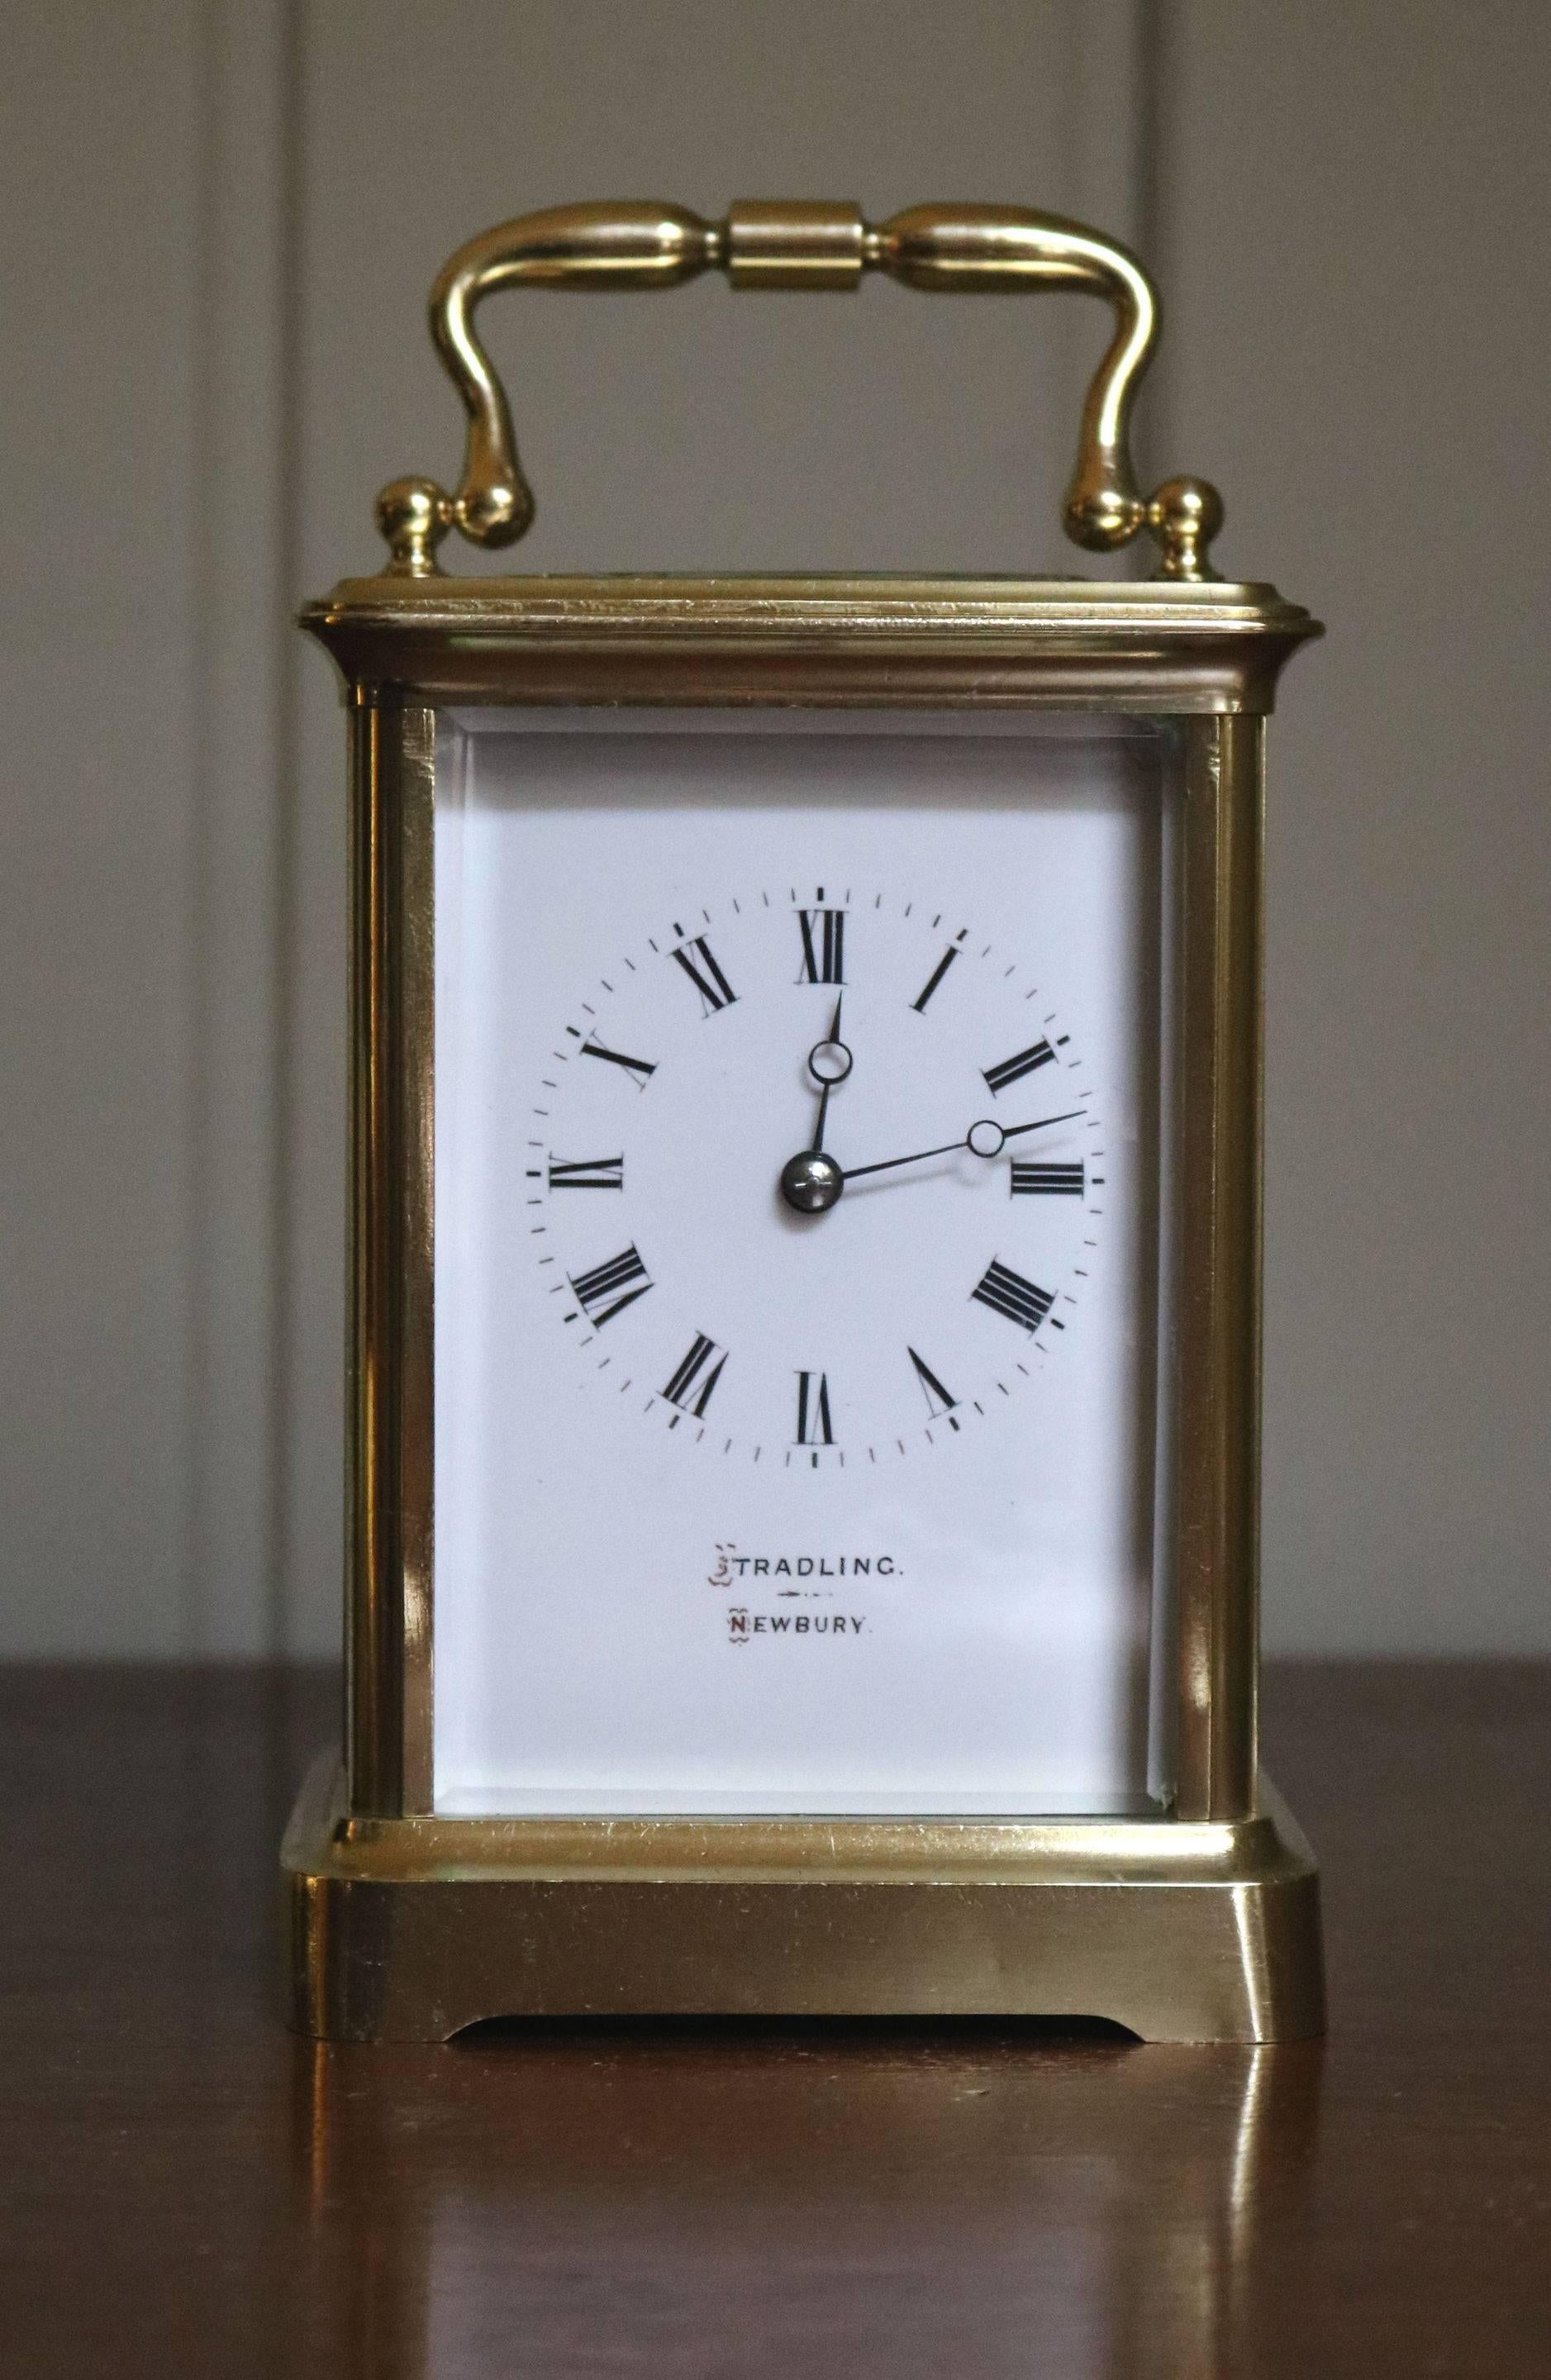 A high quality large timepiece carriage clock. The corniche case has a large oval top window and bevel glass sides. Its enamel dial has fine moon hands and the dial is signed by the original retailers, stradling of Newbury. It has an 8 day movement